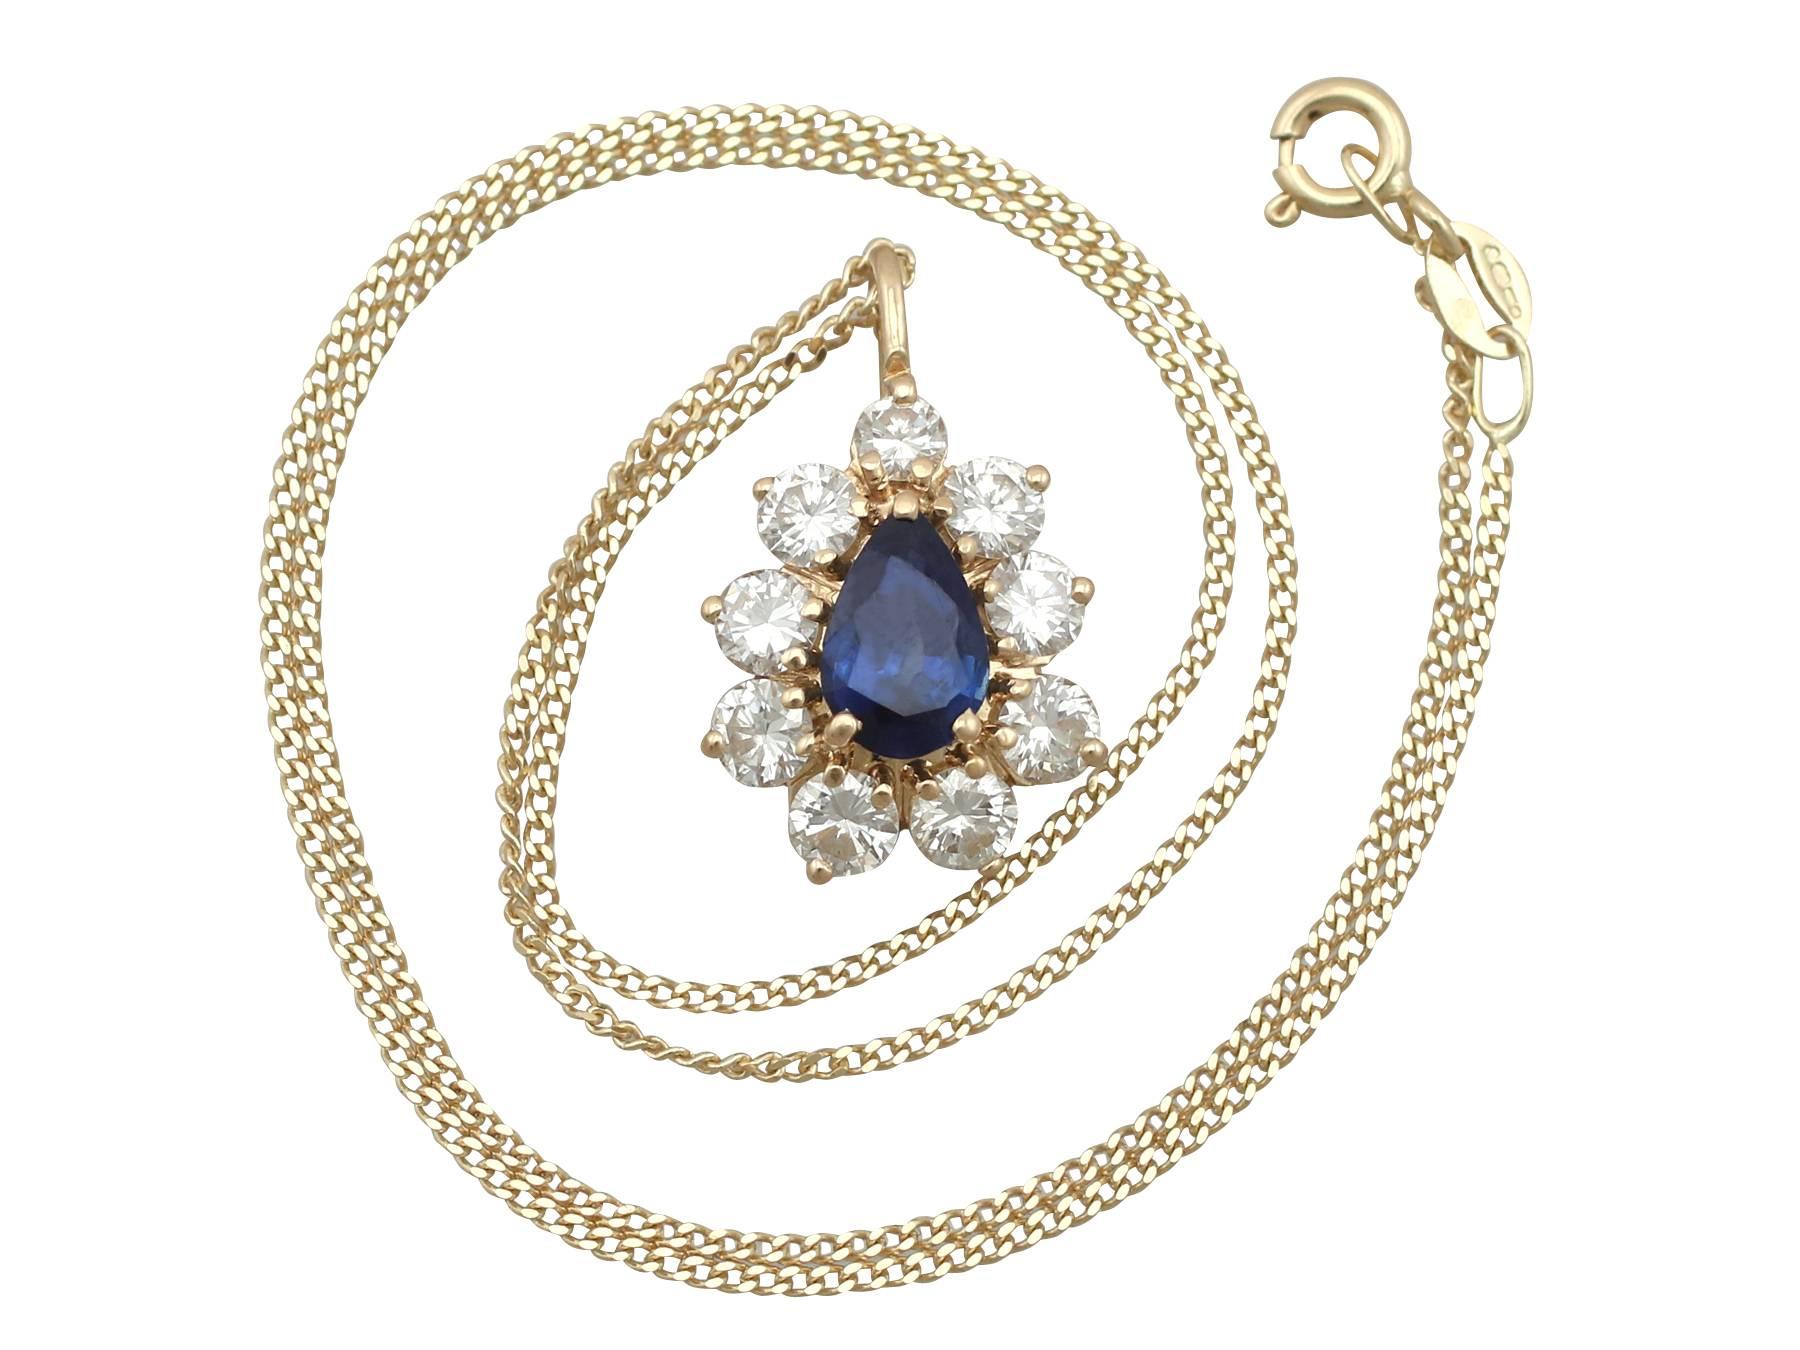 An impressive vintage French 1.60 carat blue sapphire and 1.42 carat diamond, 18 karat yellow gold cluster pendant; part of our diverse antique jewelry collections

This fine and impressive sapphire and diamond pendant has been crafted in 18 k